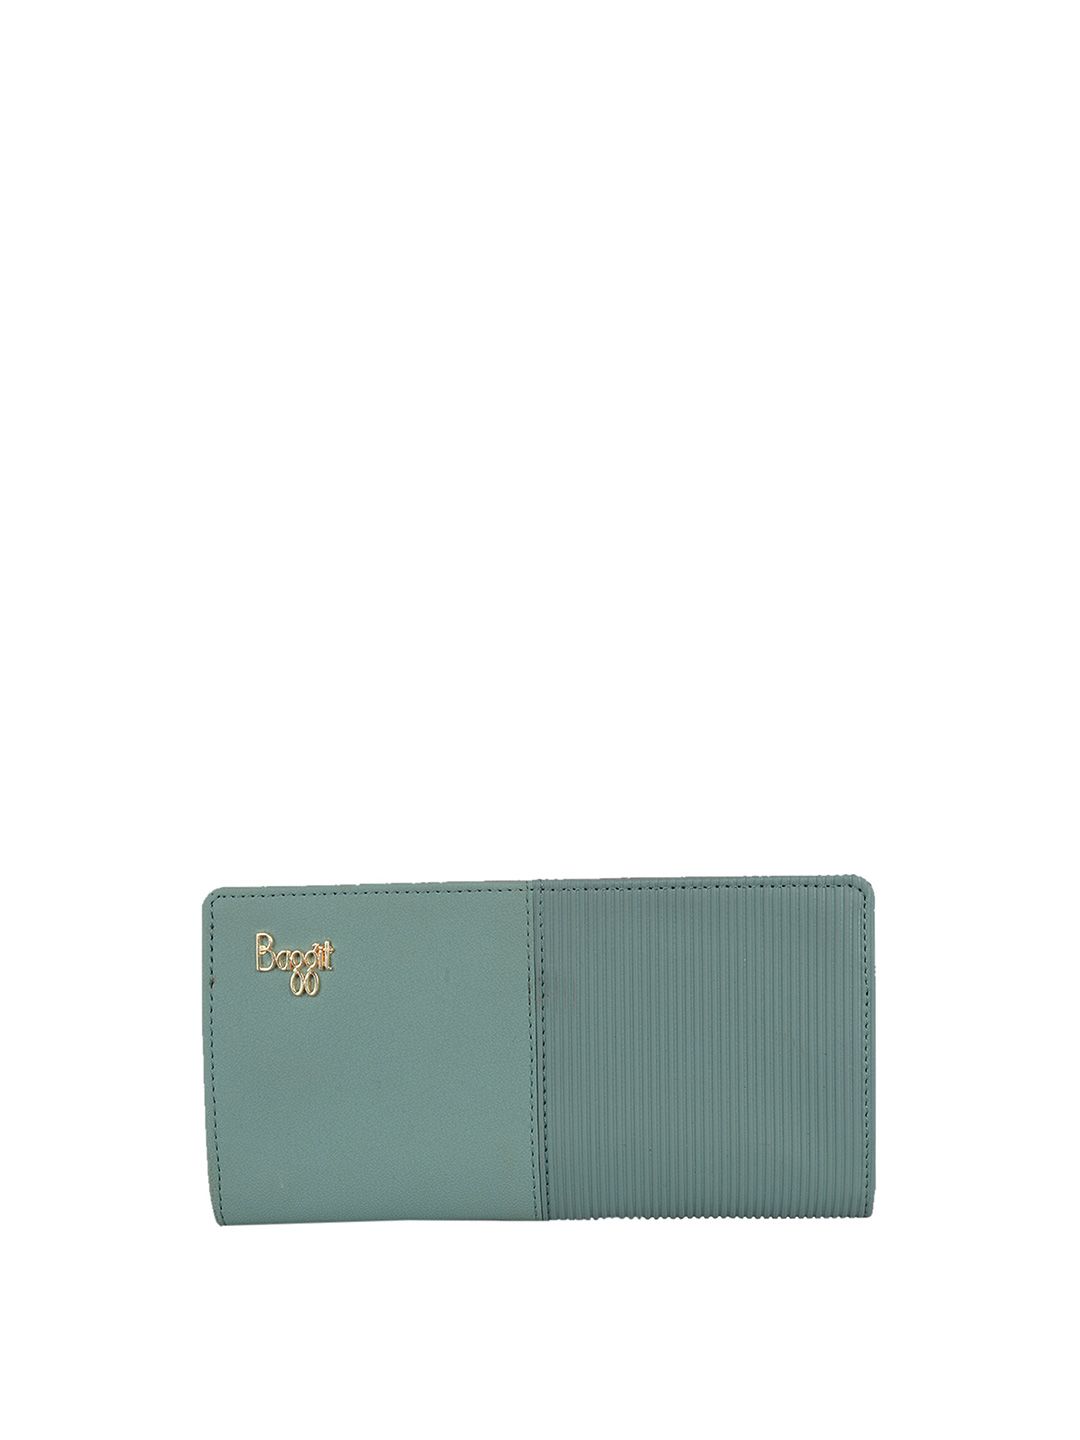 Baggit Women Turquoise Blue Two Fold Wallet Price in India